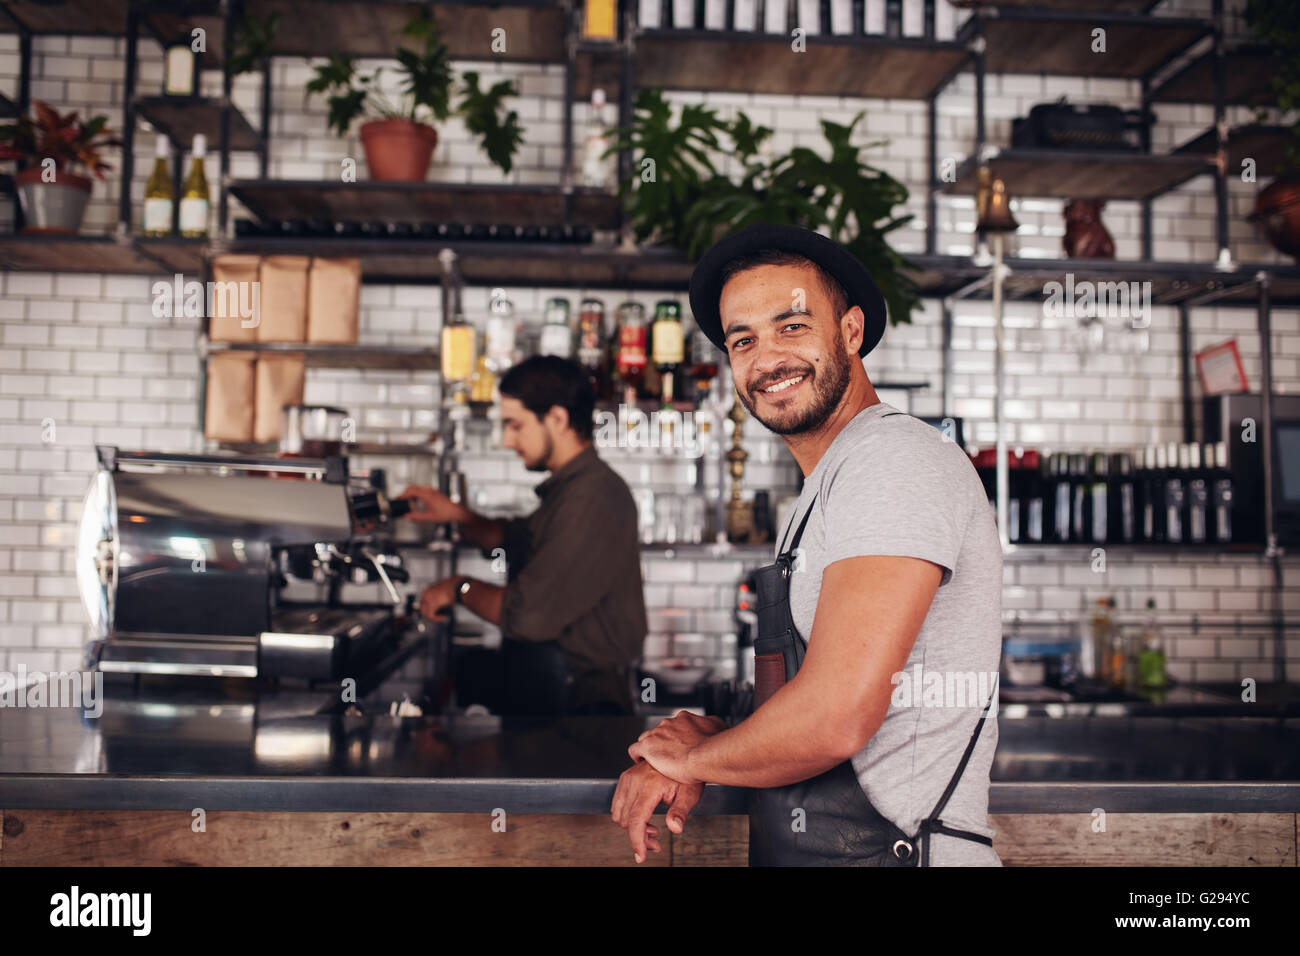 Portrait of happy young male coffee shop owner standing with barista working behind the counter making drinks. Stock Photo